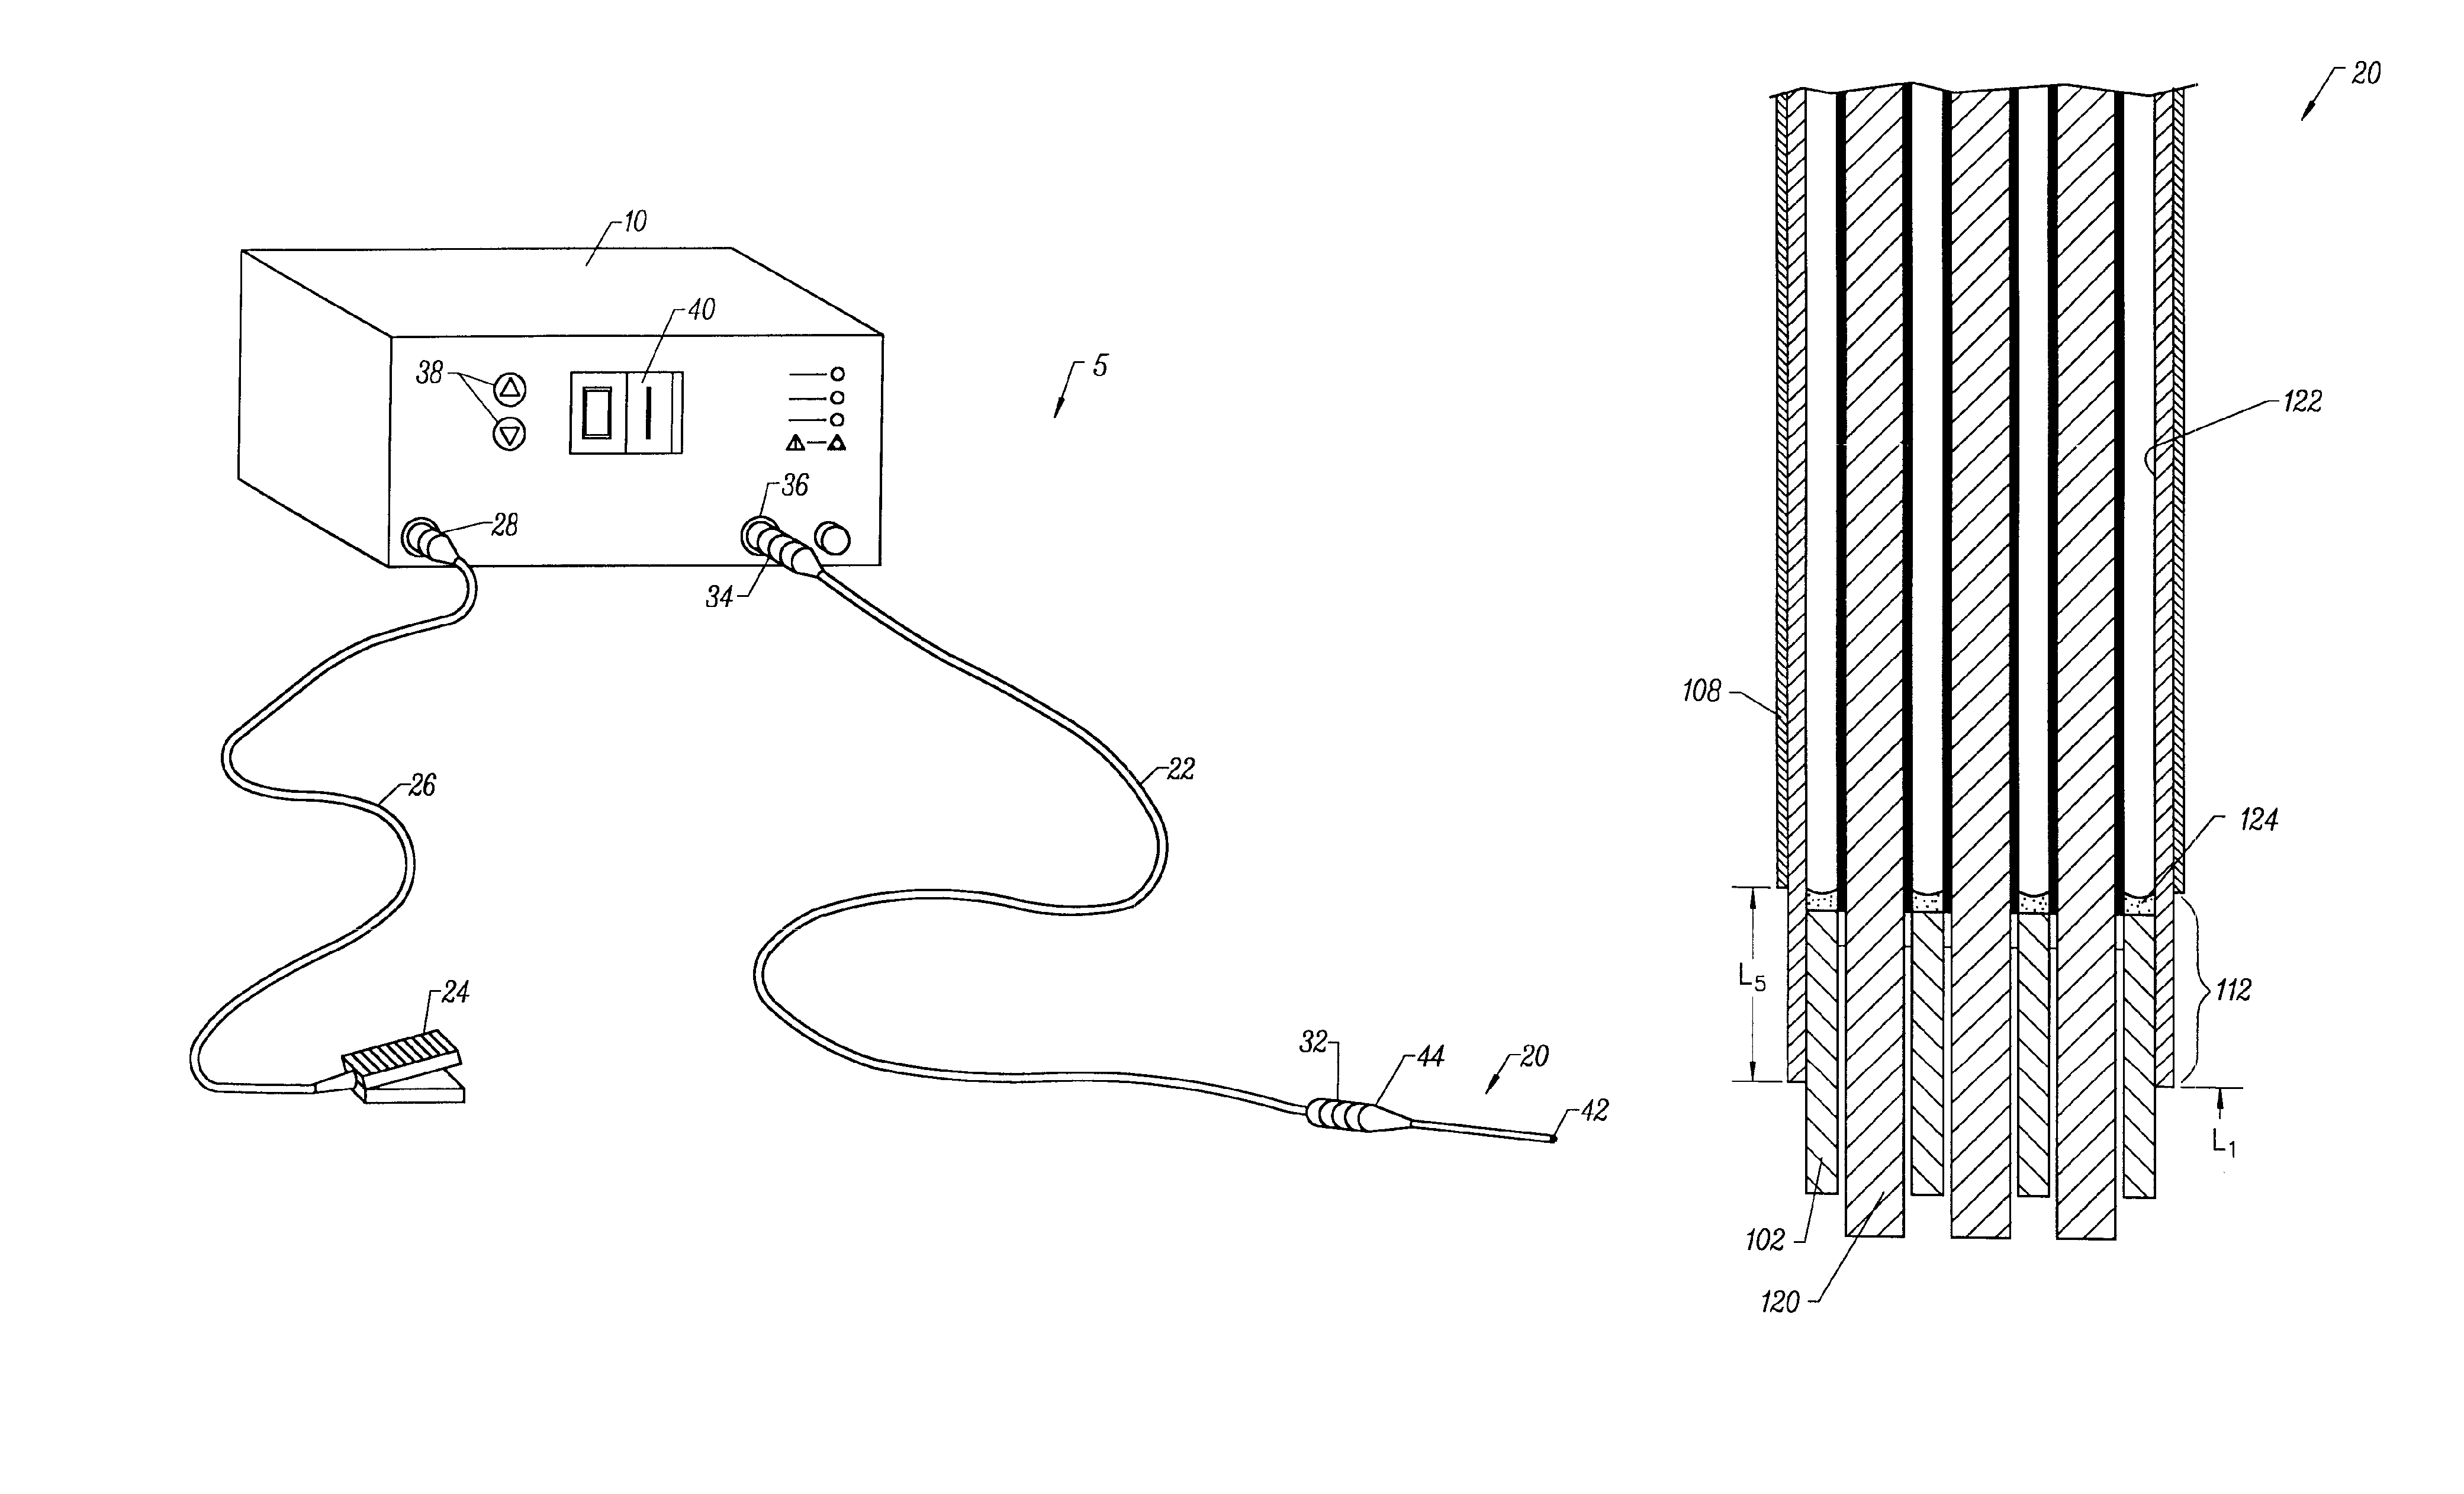 Systems and methods for electrosurgical tissue treatment